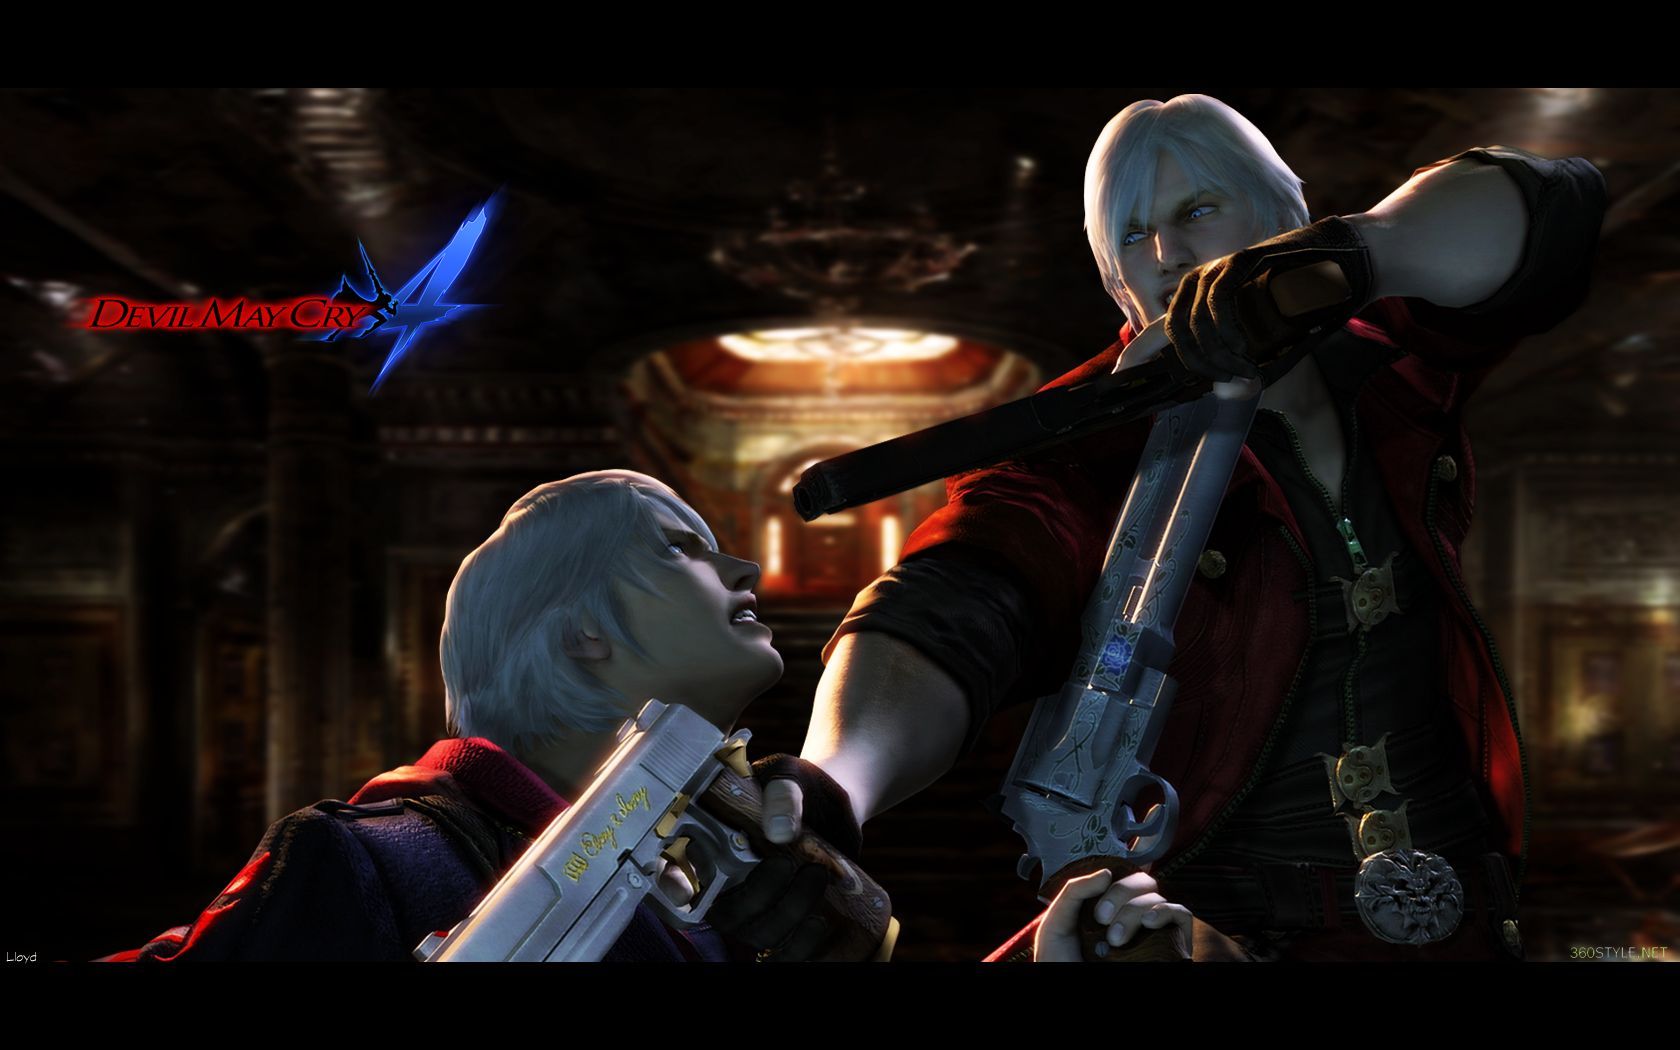 Devil May Cry 4 Wallpaper 2 by igotgame1075 on DeviantArt